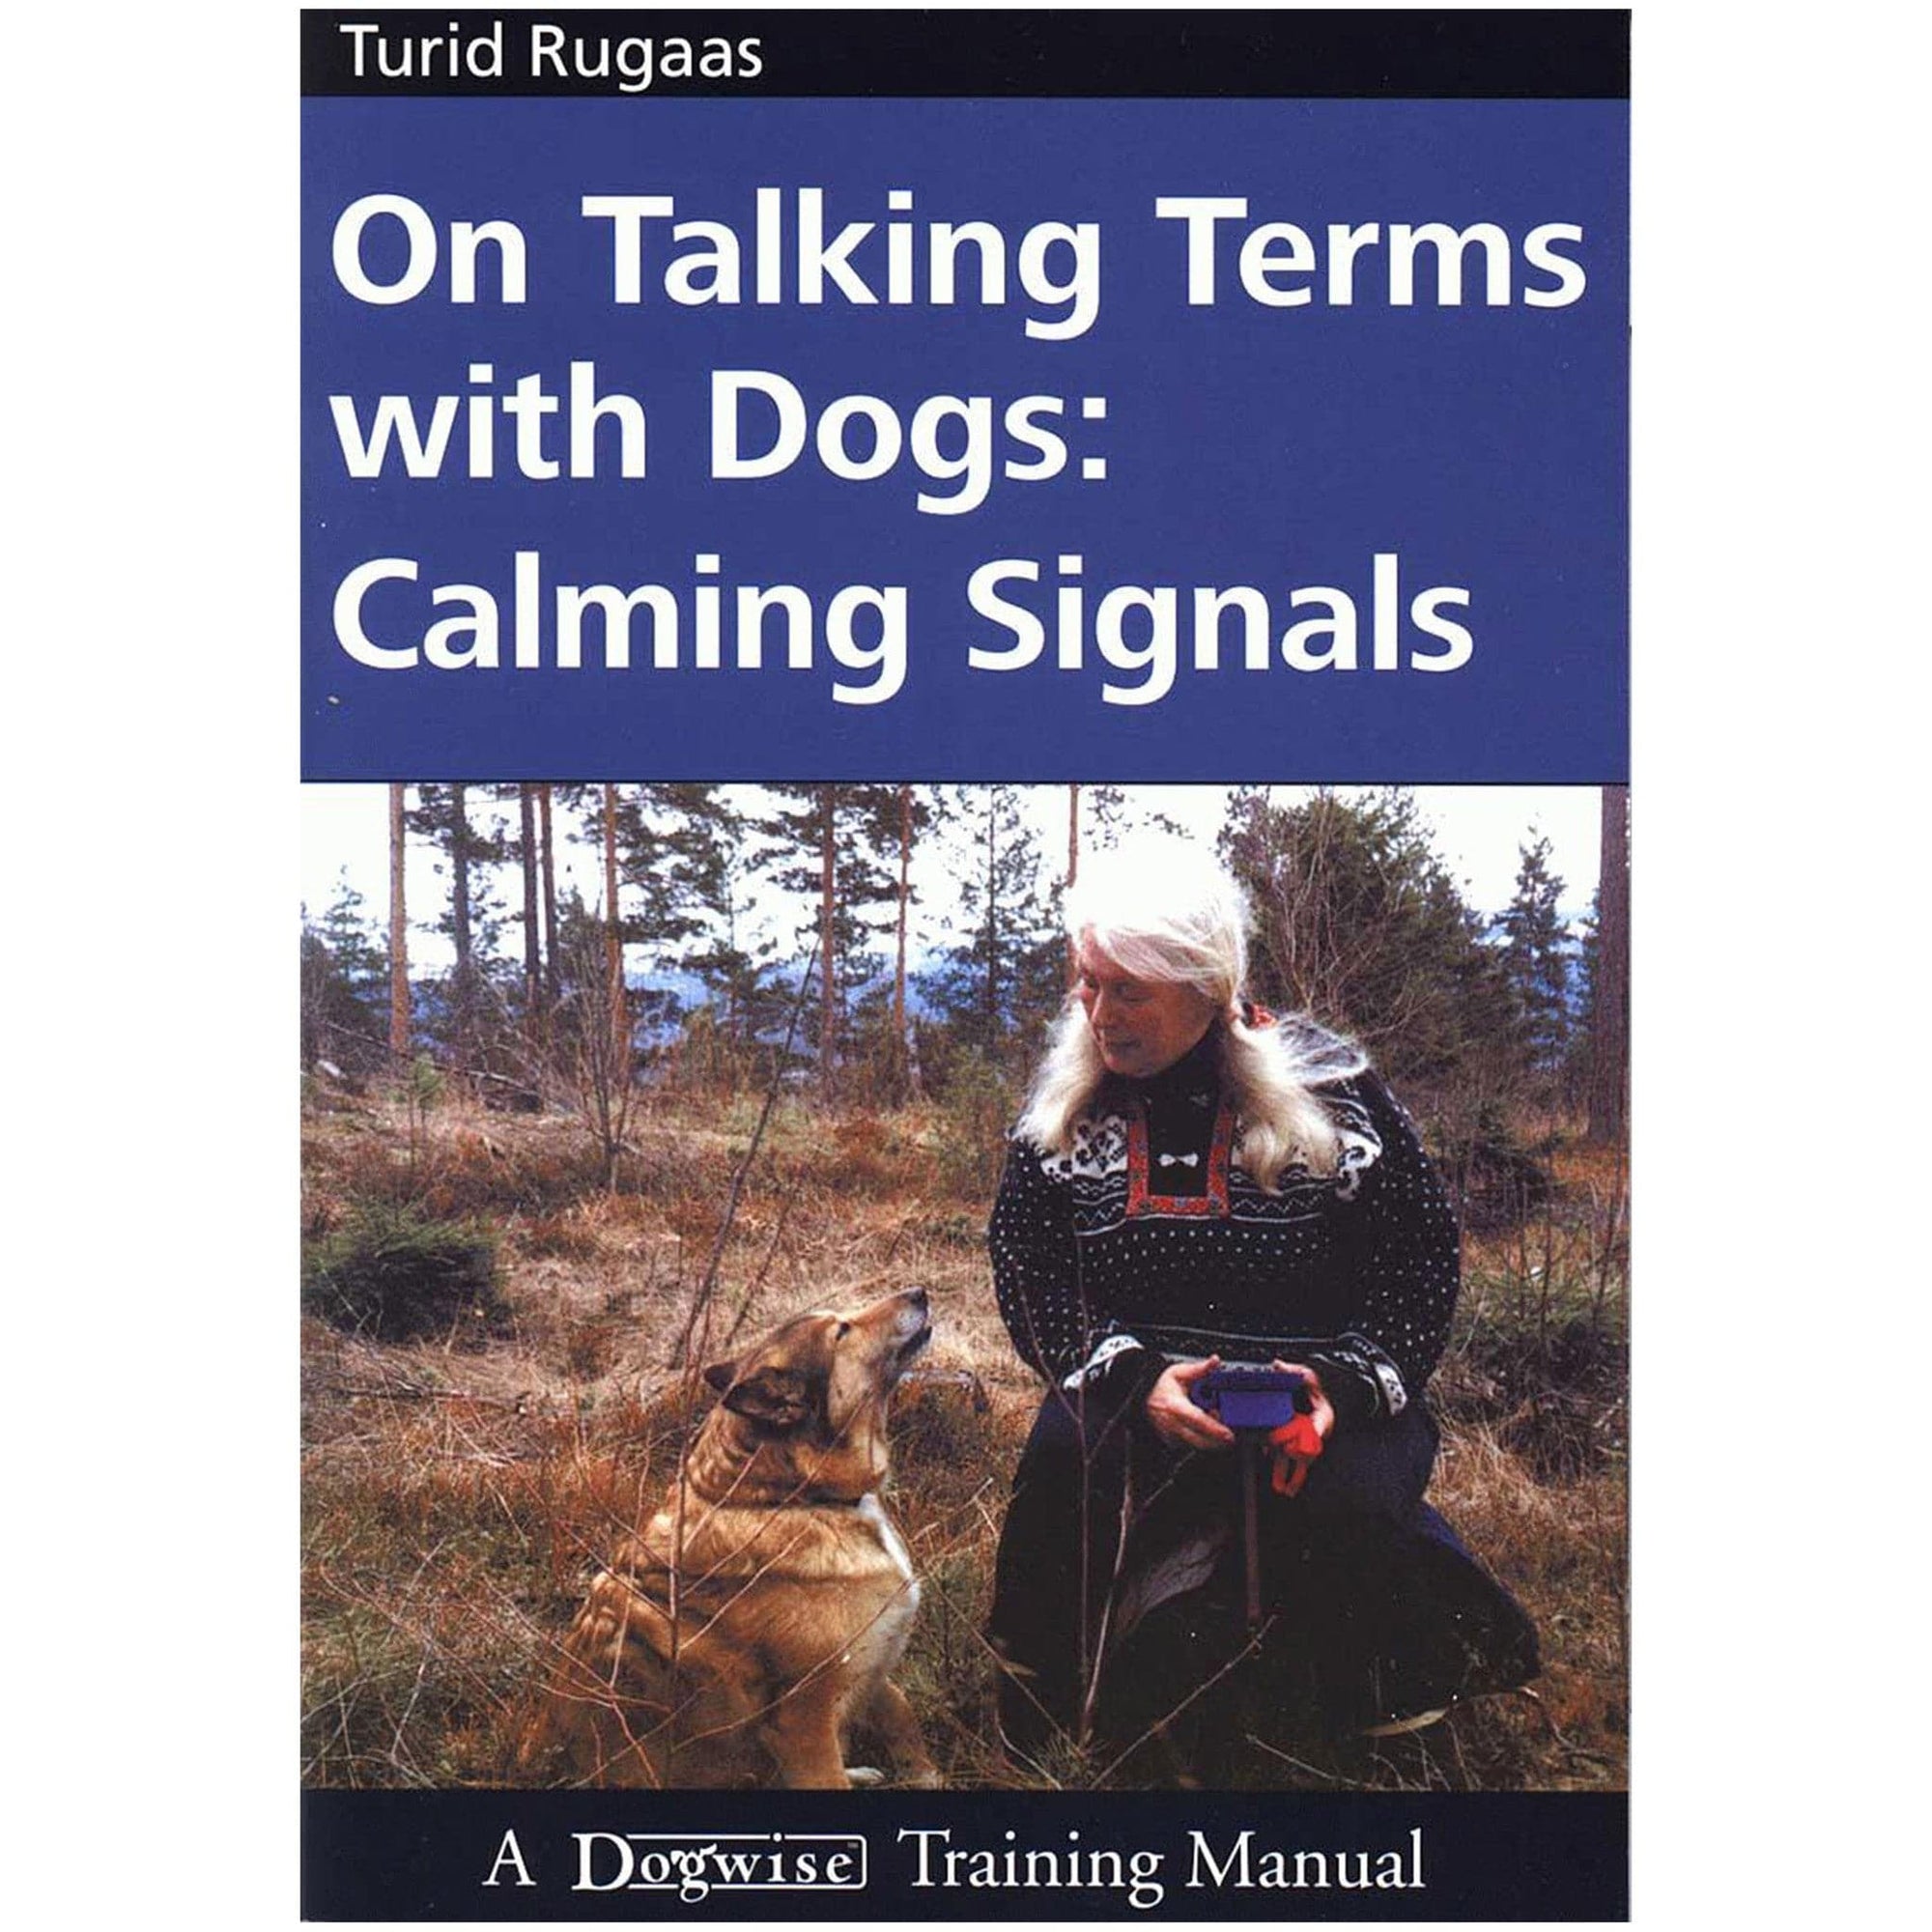 E-BOOK On Talking Terms With Dogs: Calming Signals by Turid Rugaas